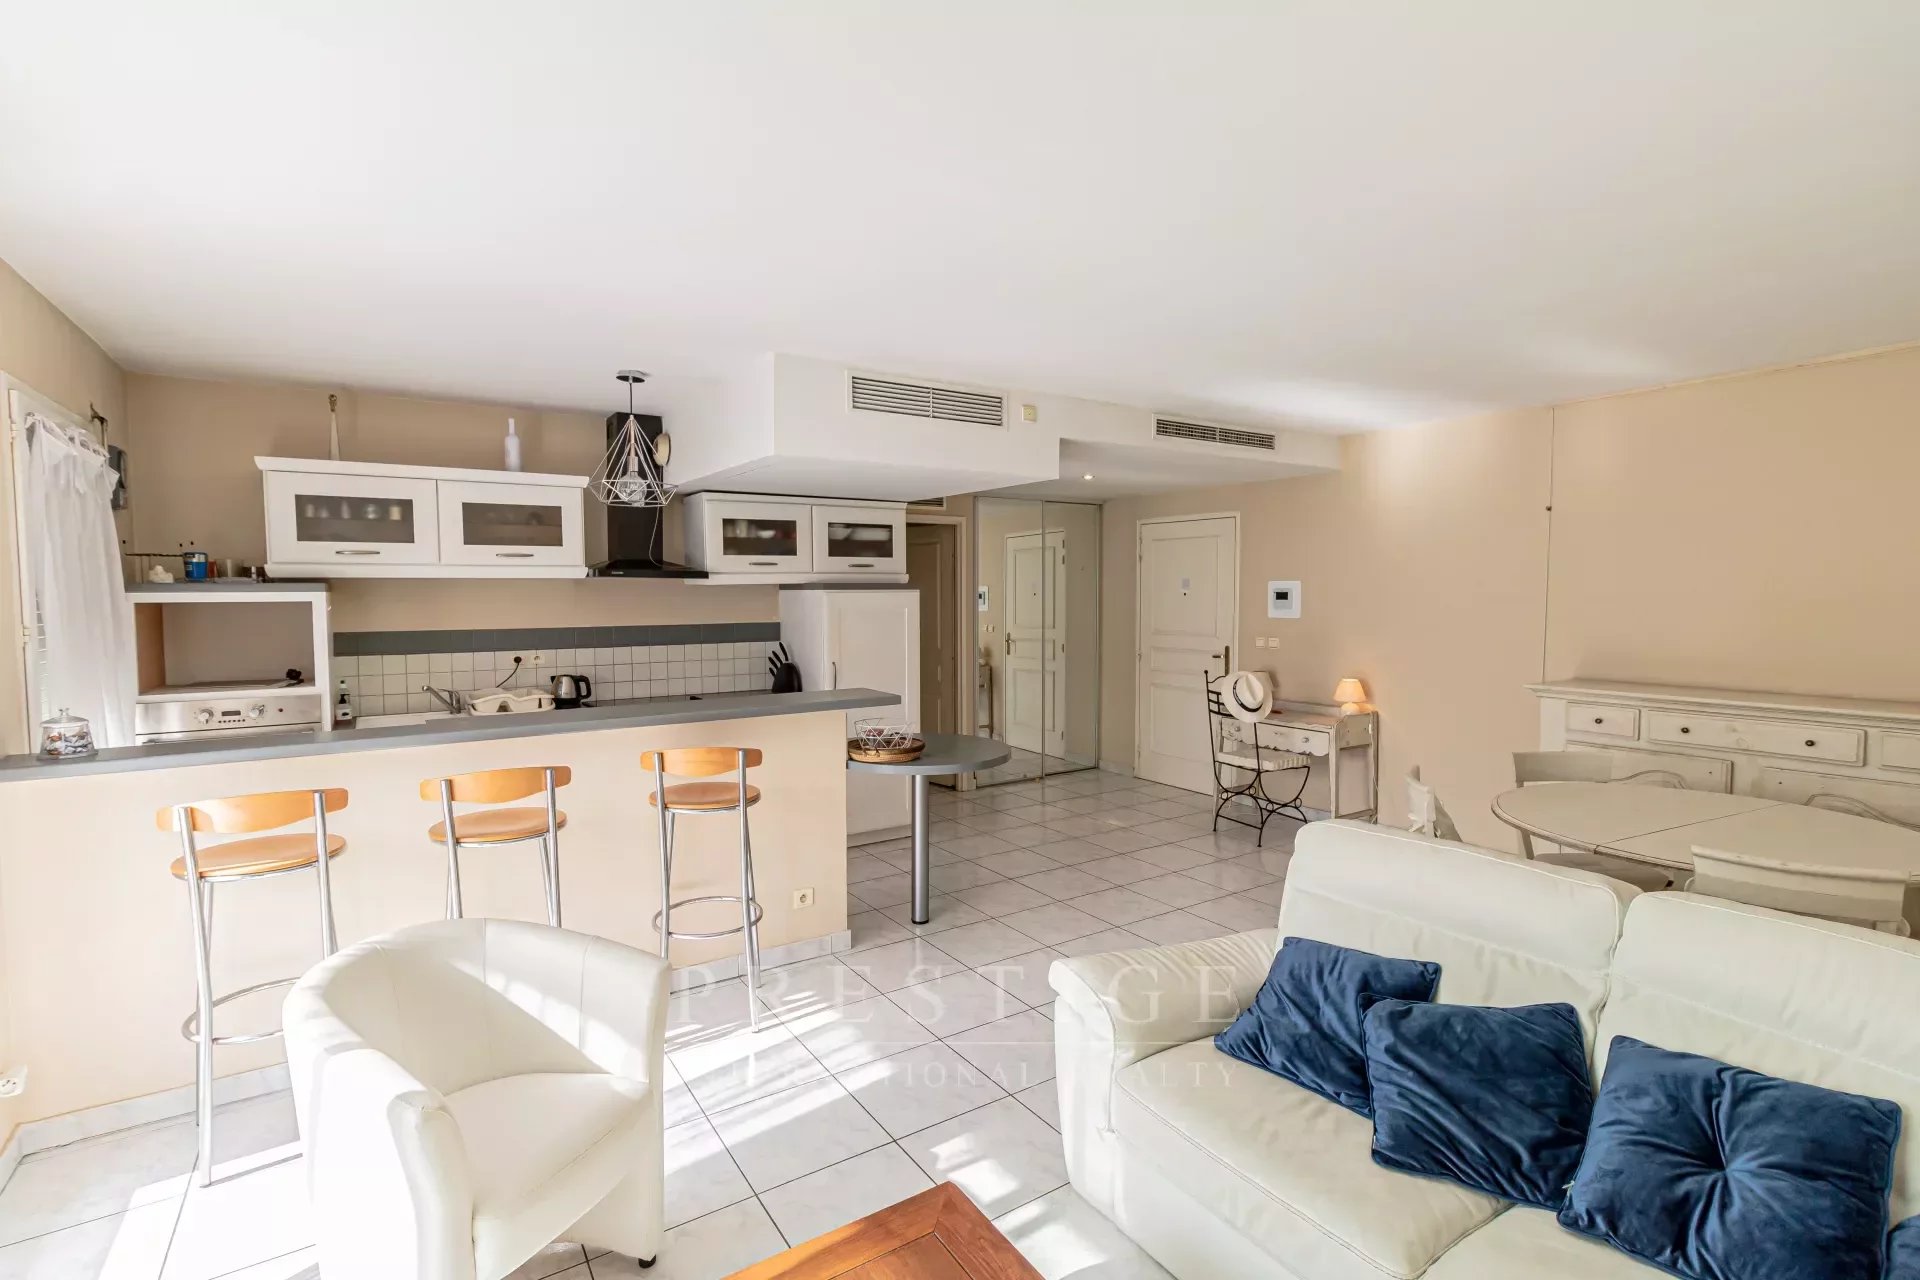 Antibes, 2 bedrooms flat with a south terrace, cave & garage